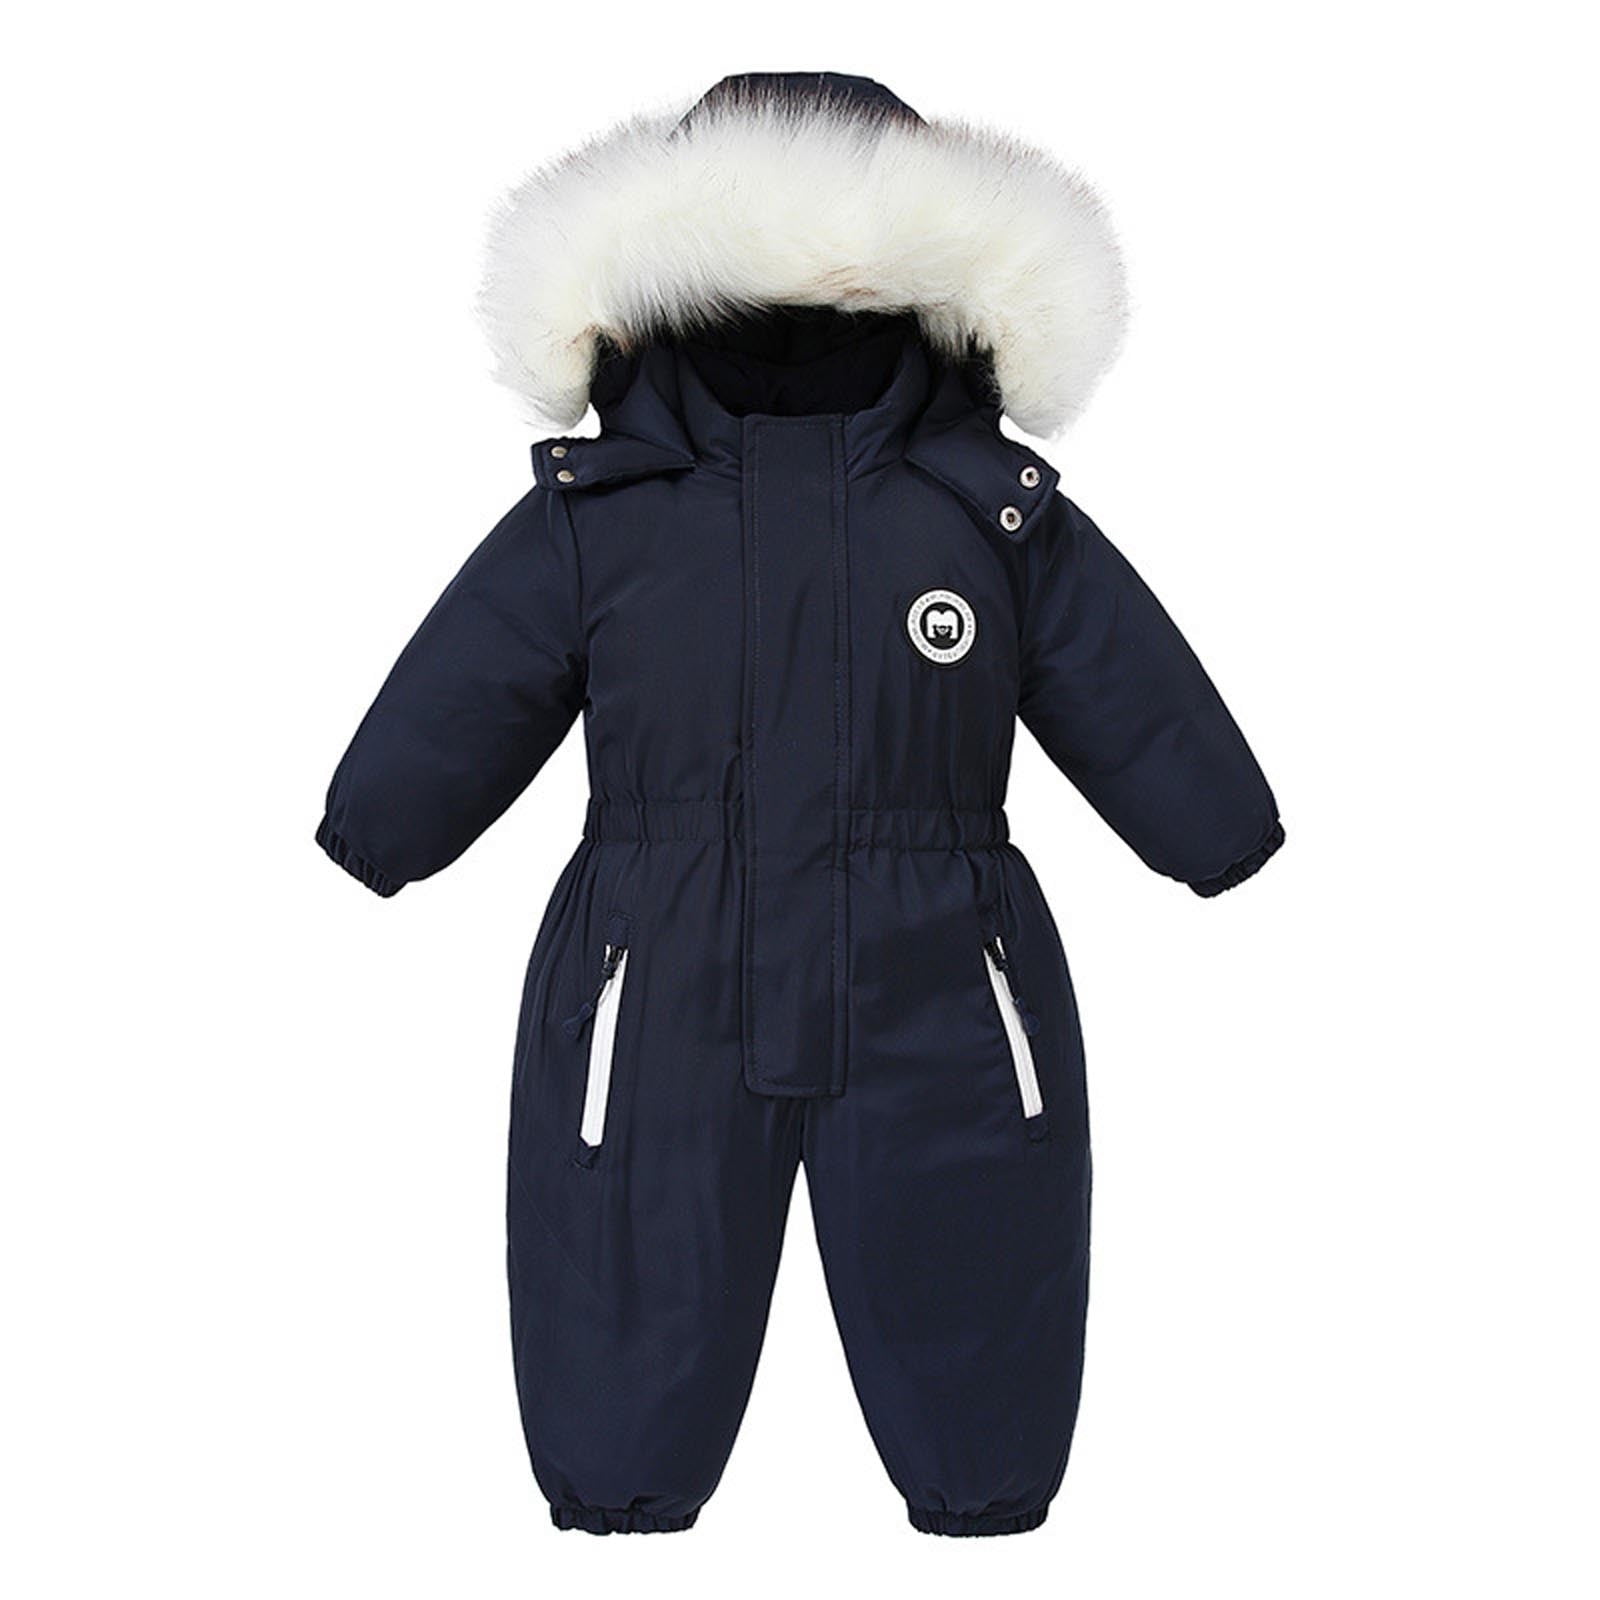 Dezsed Baby Winter Clothes Kids Boys One-Piece Snowsuits Overalls Ski ...